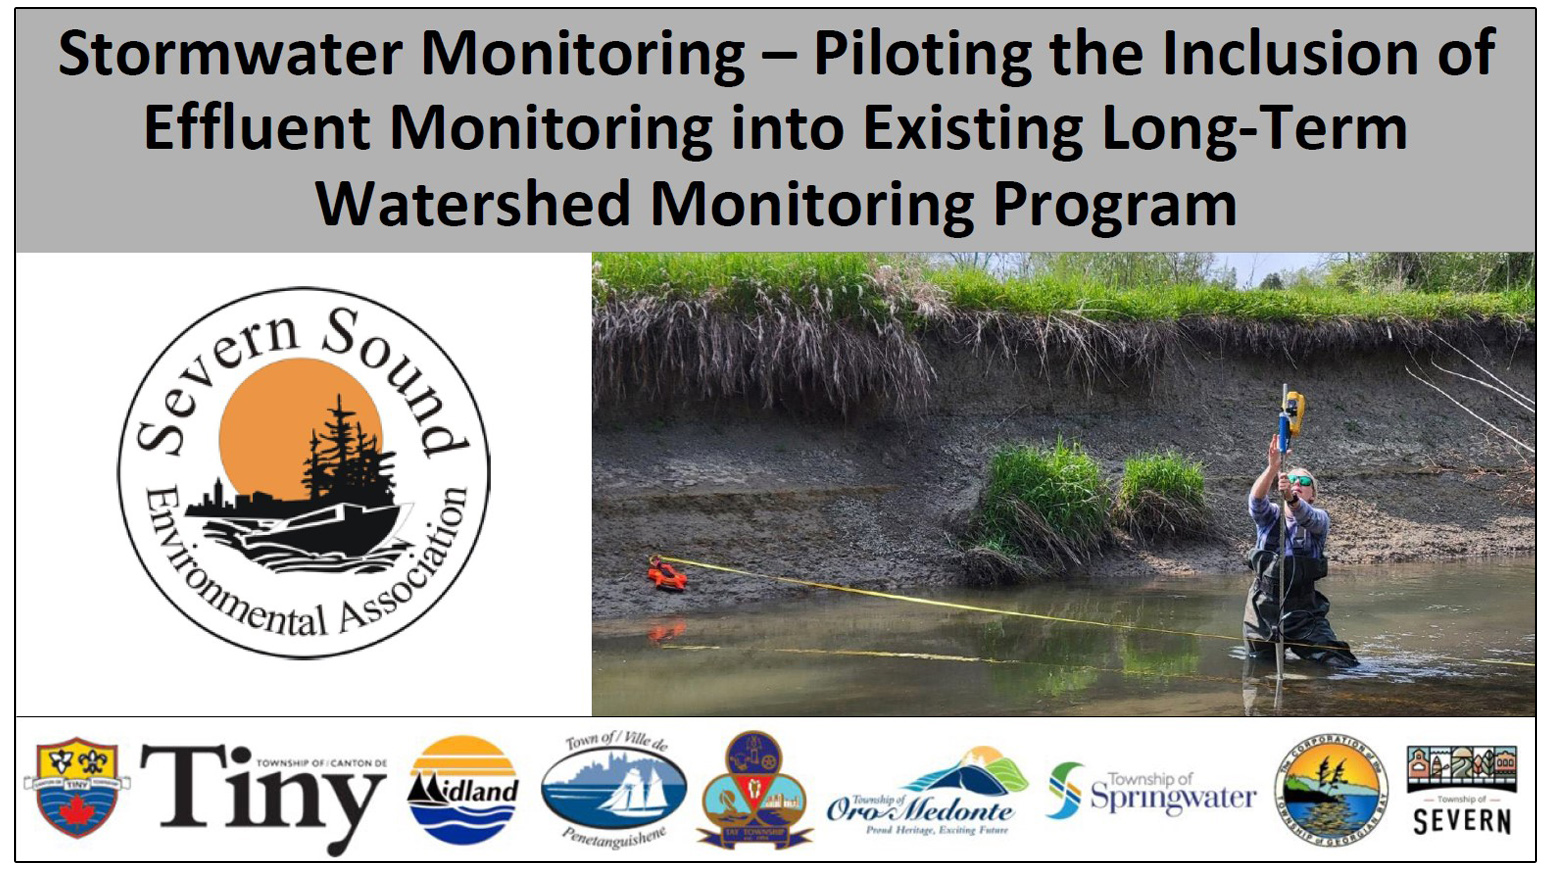 Stormwater Monitoring – Piloting the Inclusion of Effluent Monitoring into Existing Long-Term Watershed Monitoring Program - presented by Aisha Chiandet and Nikki Priestman